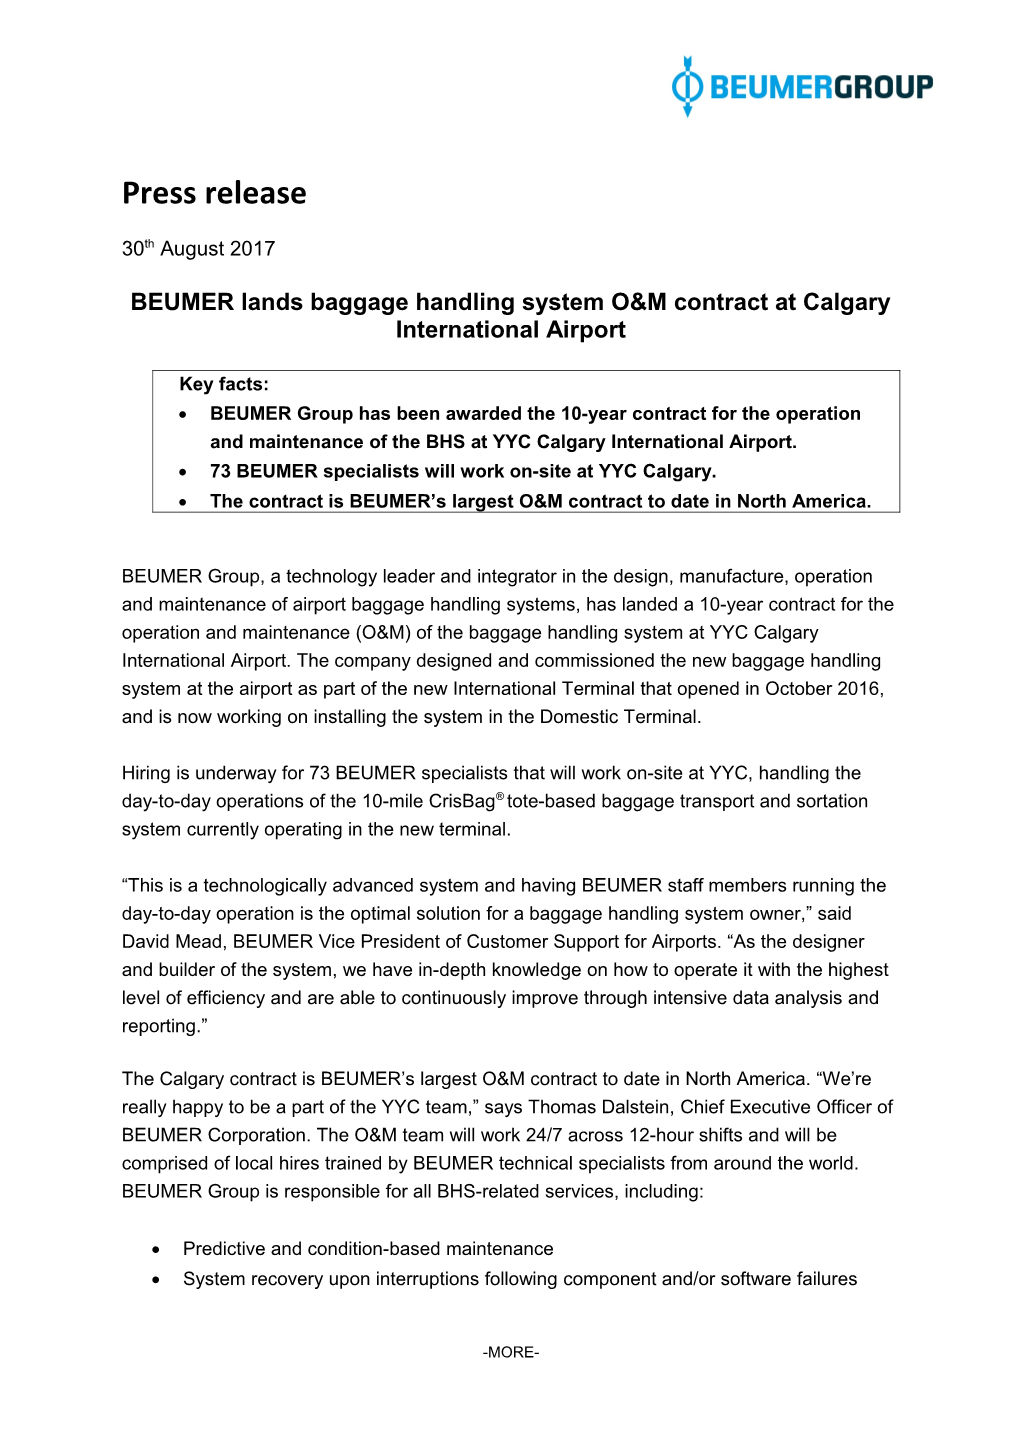 BEUMER Lands Baggage Handling System O&M Contract at Calgary International Airport